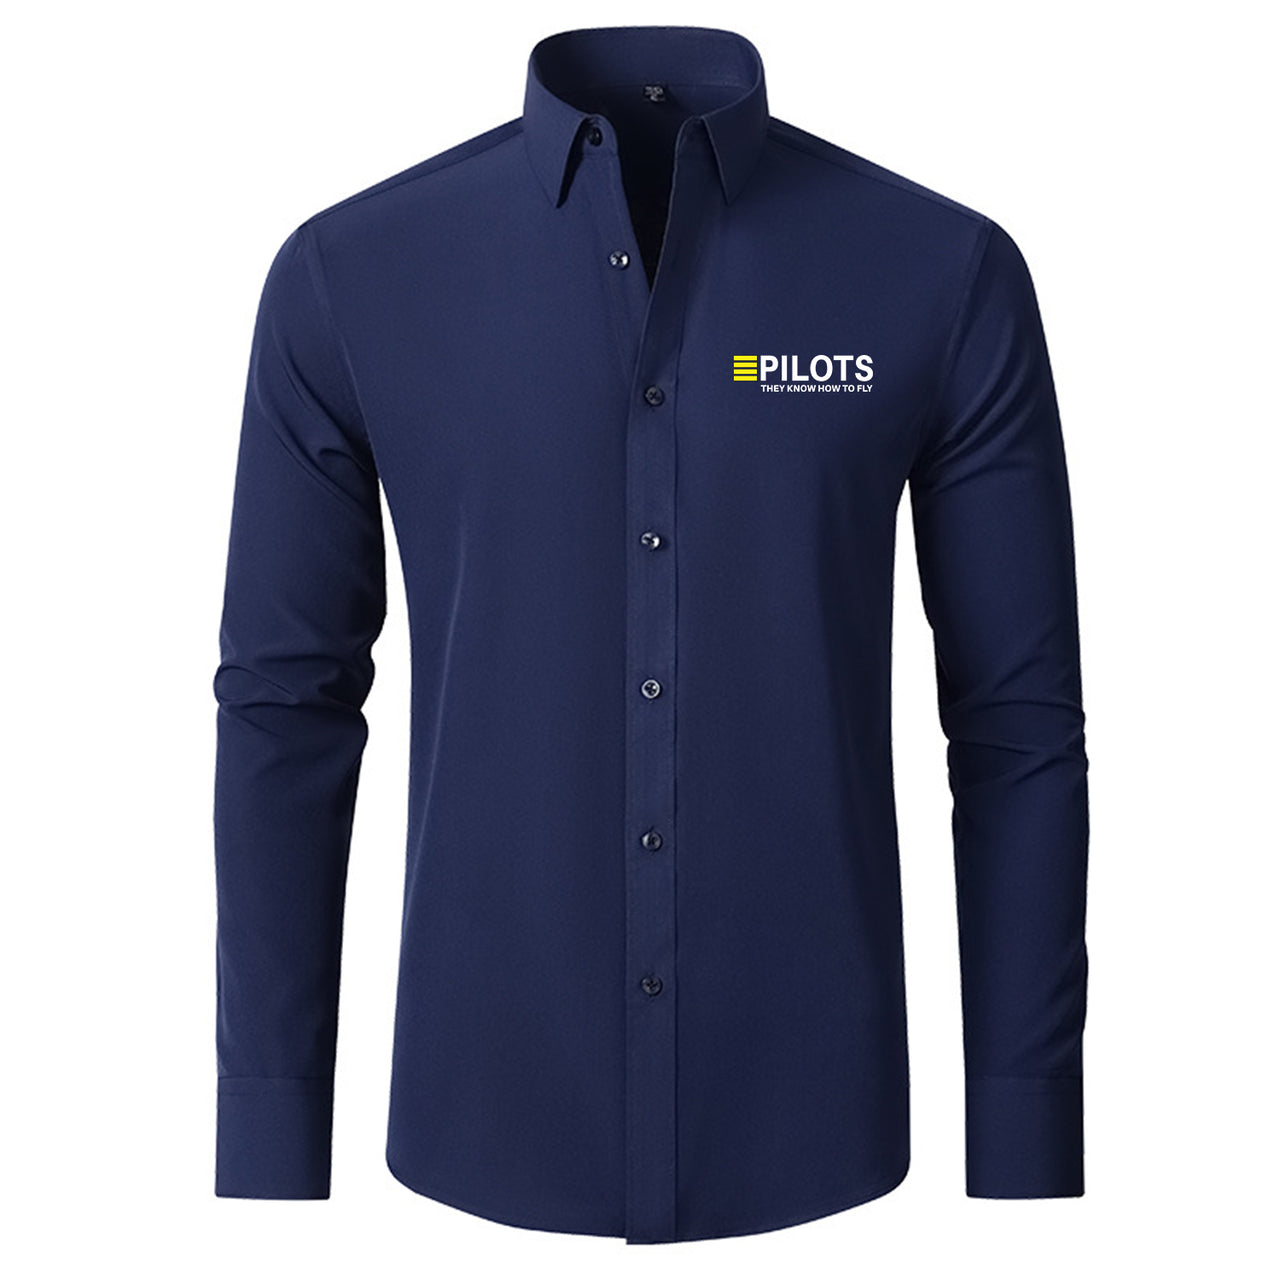 Pilots They Know How To Fly Designed Long Sleeve Shirts